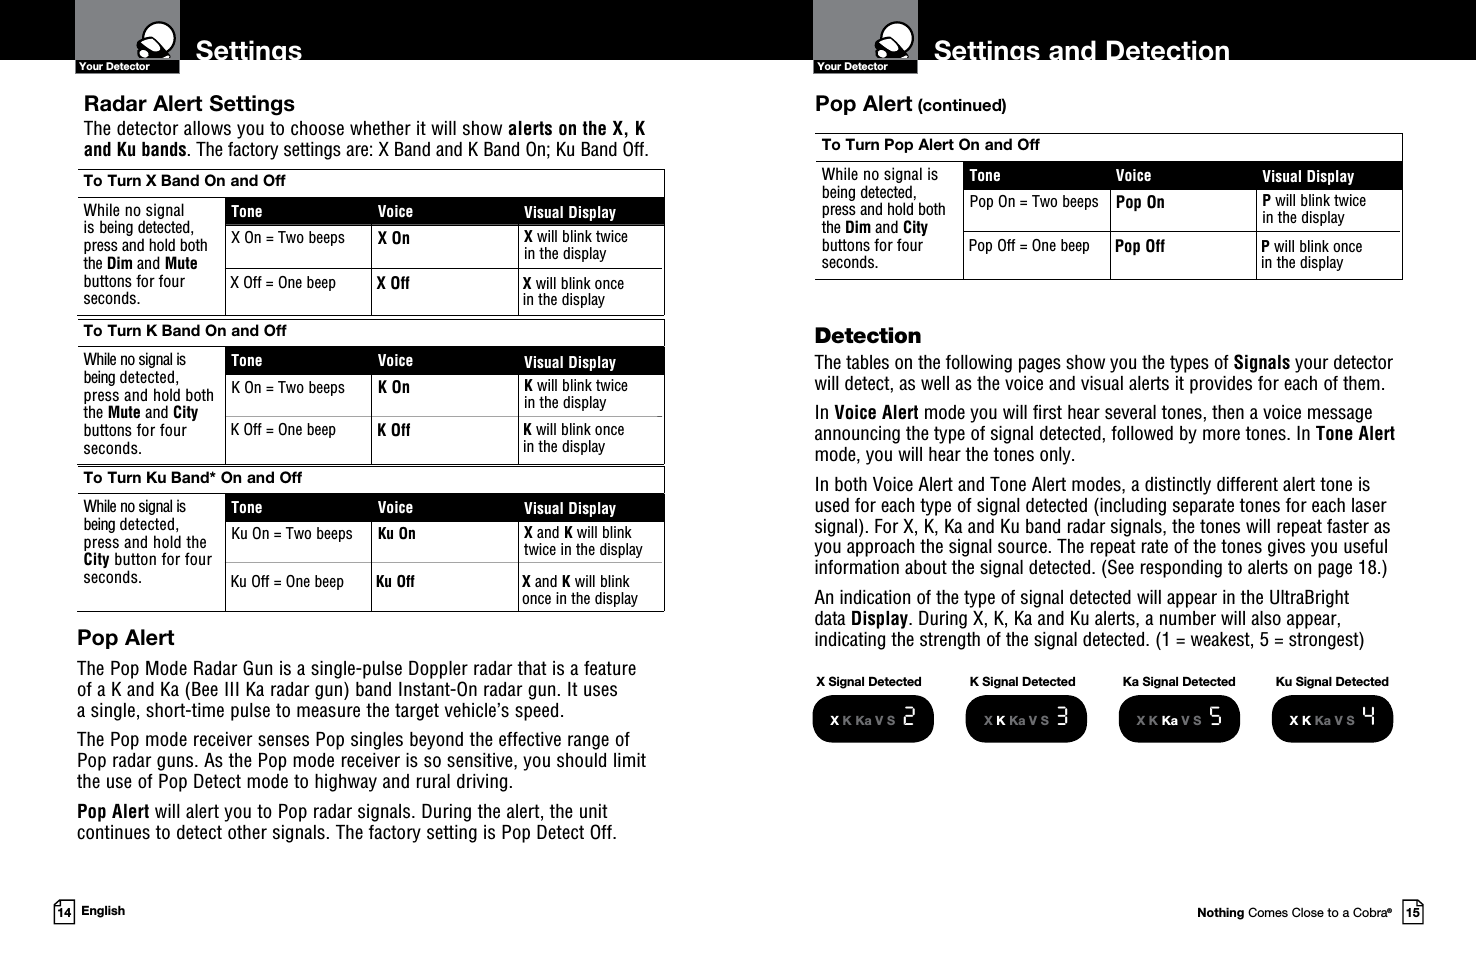 Settings and DetectionYour DetectorNothing Comes Close to a Cobra®15SettingsYour Detector14 EnglishDetection  The tables on the following pages show you the types of Signals your detector will detect, as well as the voice and visual alerts it provides for each of them.In Voice Alert mode you will first hear several tones, then a voice message announcing the type of signal detected, followed by more tones. In Tone Alert mode, you will hear the tones only.In both Voice Alert and Tone Alert modes, a distinctly different alert tone is used for each type of signal detected (including separate tones for each laser signal). For X, K, Ka and Ku band radar signals, the tones will repeat faster as  you approach the signal source. The repeat rate of the tones gives you useful information about the signal detected. (See responding to alerts on page 18.)   An indication of the type of signal detected will appear in the UltraBright  data Display. During X, K, Ka and Ku alerts, a number will also appear,  indicating the strength of the signal detected. (1 = weakest, 5 = strongest)  X Signal DetectedX K Ka V S  2X K Ka V S  3X K Ka V S  5X K Ka V S  4K Signal Detected Ka Signal Detected Ku Signal DetectedTo Turn Pop Alert On and OffWhile no signal is being detected,  press and hold both the Dim and City buttons for four seconds.Tone Voice Visual DisplayPop On = Two beeps Pop On P will blink twice  in the displayPop Off P will blink once  in the displayPop Off = One beep Radar Alert Settings  The detector allows you to choose whether it will show alerts on the X, K  and Ku bands. The factory settings are: X Band and K Band On; Ku Band Off.To Turn K Band On and OffWhile no signal is  being detected, press and hold both the Mute and City buttons for four seconds.Tone Voice Visual DisplayK On = Two beeps K On K will blink twice  in the displayTo Turn Ku Band* On and OffWhile no signal is being detected, press and hold the City button for four seconds.Tone Voice Visual DisplayKu On = Two beeps Ku On X and K will blink twice in the displayK will blink once  in the displayK Off = One beep K OffKu Off X and K will blink once in the displayKu Off = One beepTo Turn X Band On and OffWhile no signal is being detected, press and hold both the Dim and Mute buttons for four seconds.Tone Voice Visual DisplayX On = Two beeps X On X will blink twice  in the displayX Off X will blink once  in the displayX Off = One beepPop AlertThe Pop Mode Radar Gun is a single-pulse Doppler radar that is a feature  of a K and Ka (Bee III Ka radar gun) band Instant-On radar gun. It uses  a single, short-time pulse to measure the target vehicle’s speed.The Pop mode receiver senses Pop singles beyond the effective range of Pop radar guns. As the Pop mode receiver is so sensitive, you should limit the use of Pop Detect mode to highway and rural driving.Pop Alert will alert you to Pop radar signals. During the alert, the unit   continues to detect other signals. The factory setting is Pop Detect Off. Pop Alert (continued)